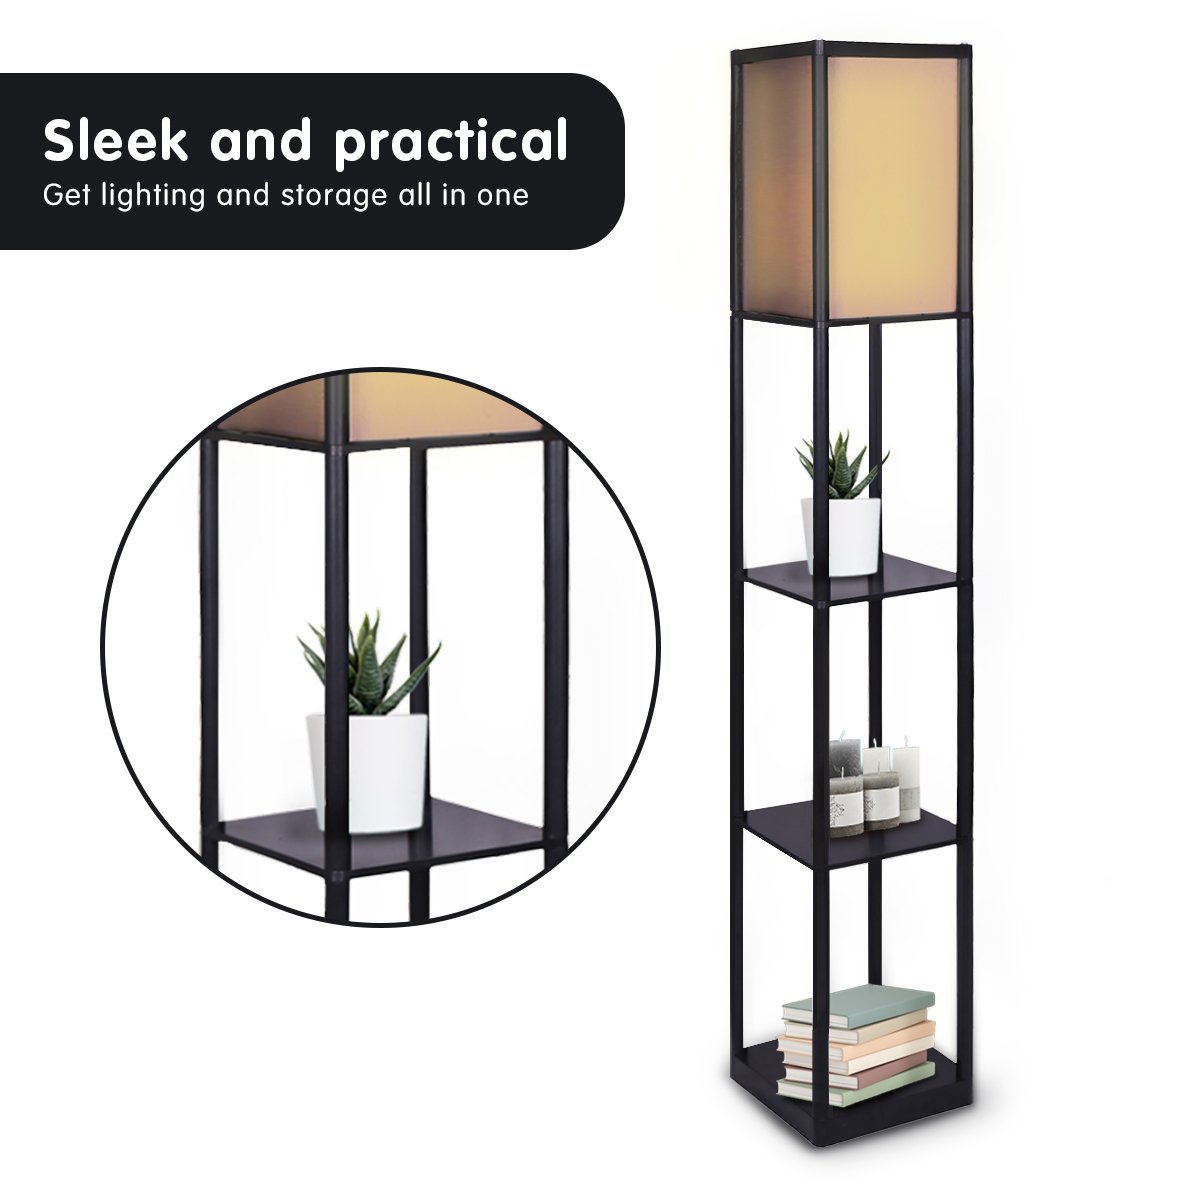 Floor Lamp Shelves in Black Frame with Brown Fabric Shade